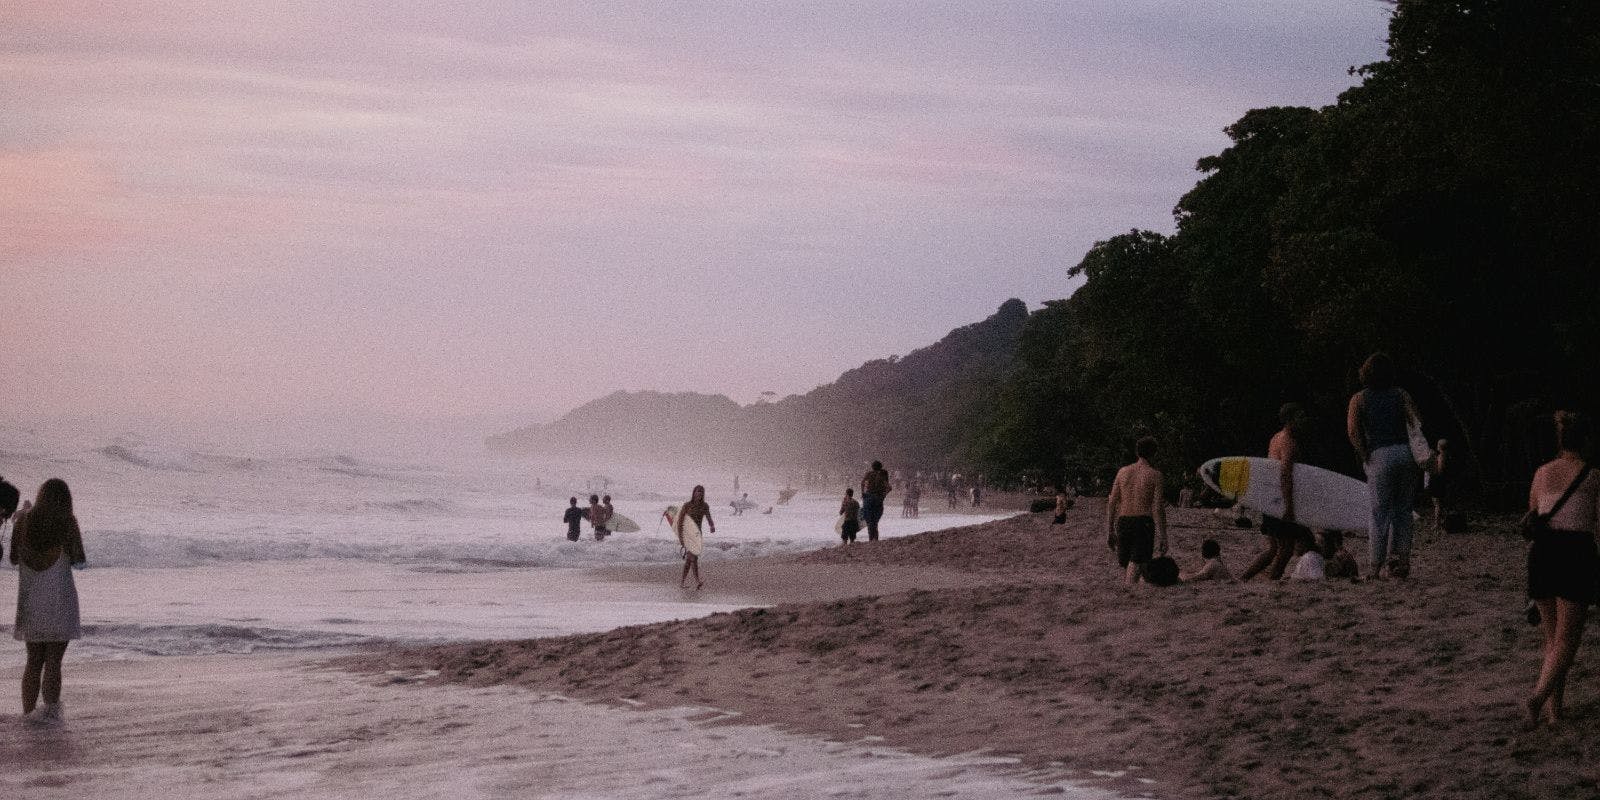 Coworking, Coliving and Surfing in Playa Hermosa (Costa Rica)